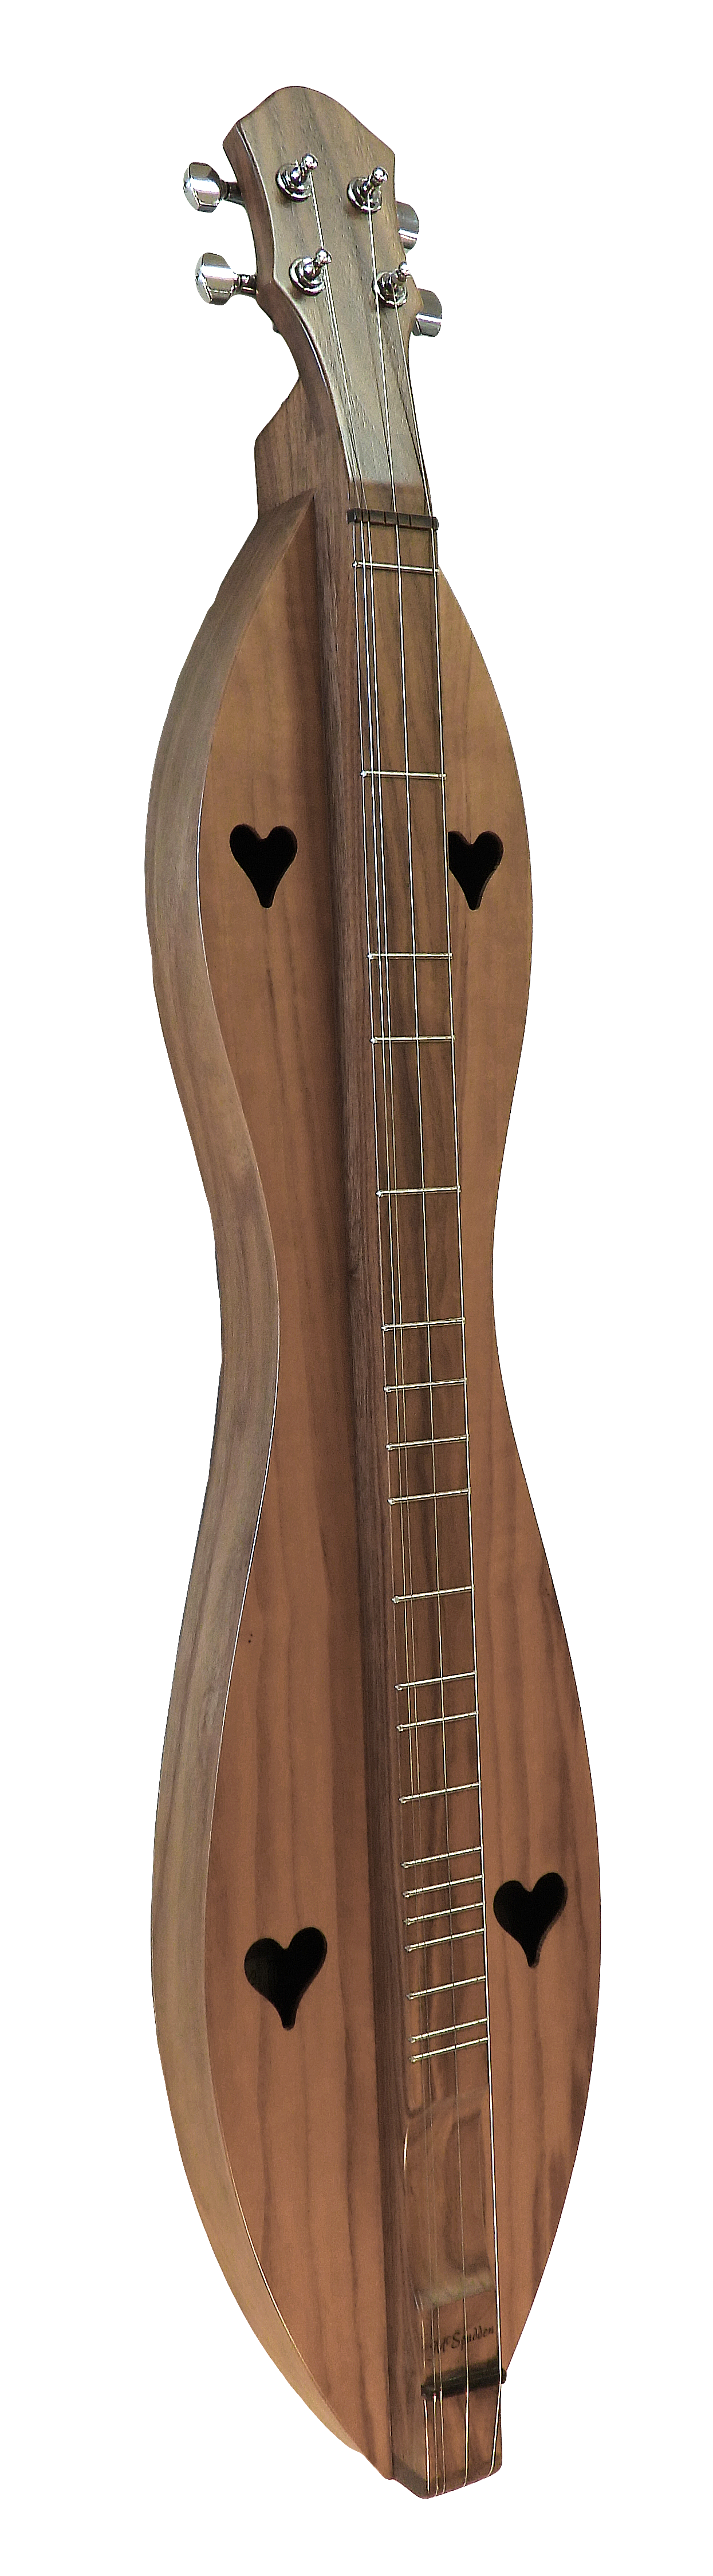 A customizable 4 String Flathead Hourglass with Walnut back, sides and top ukulele (4FH26WW) with black birds on it.